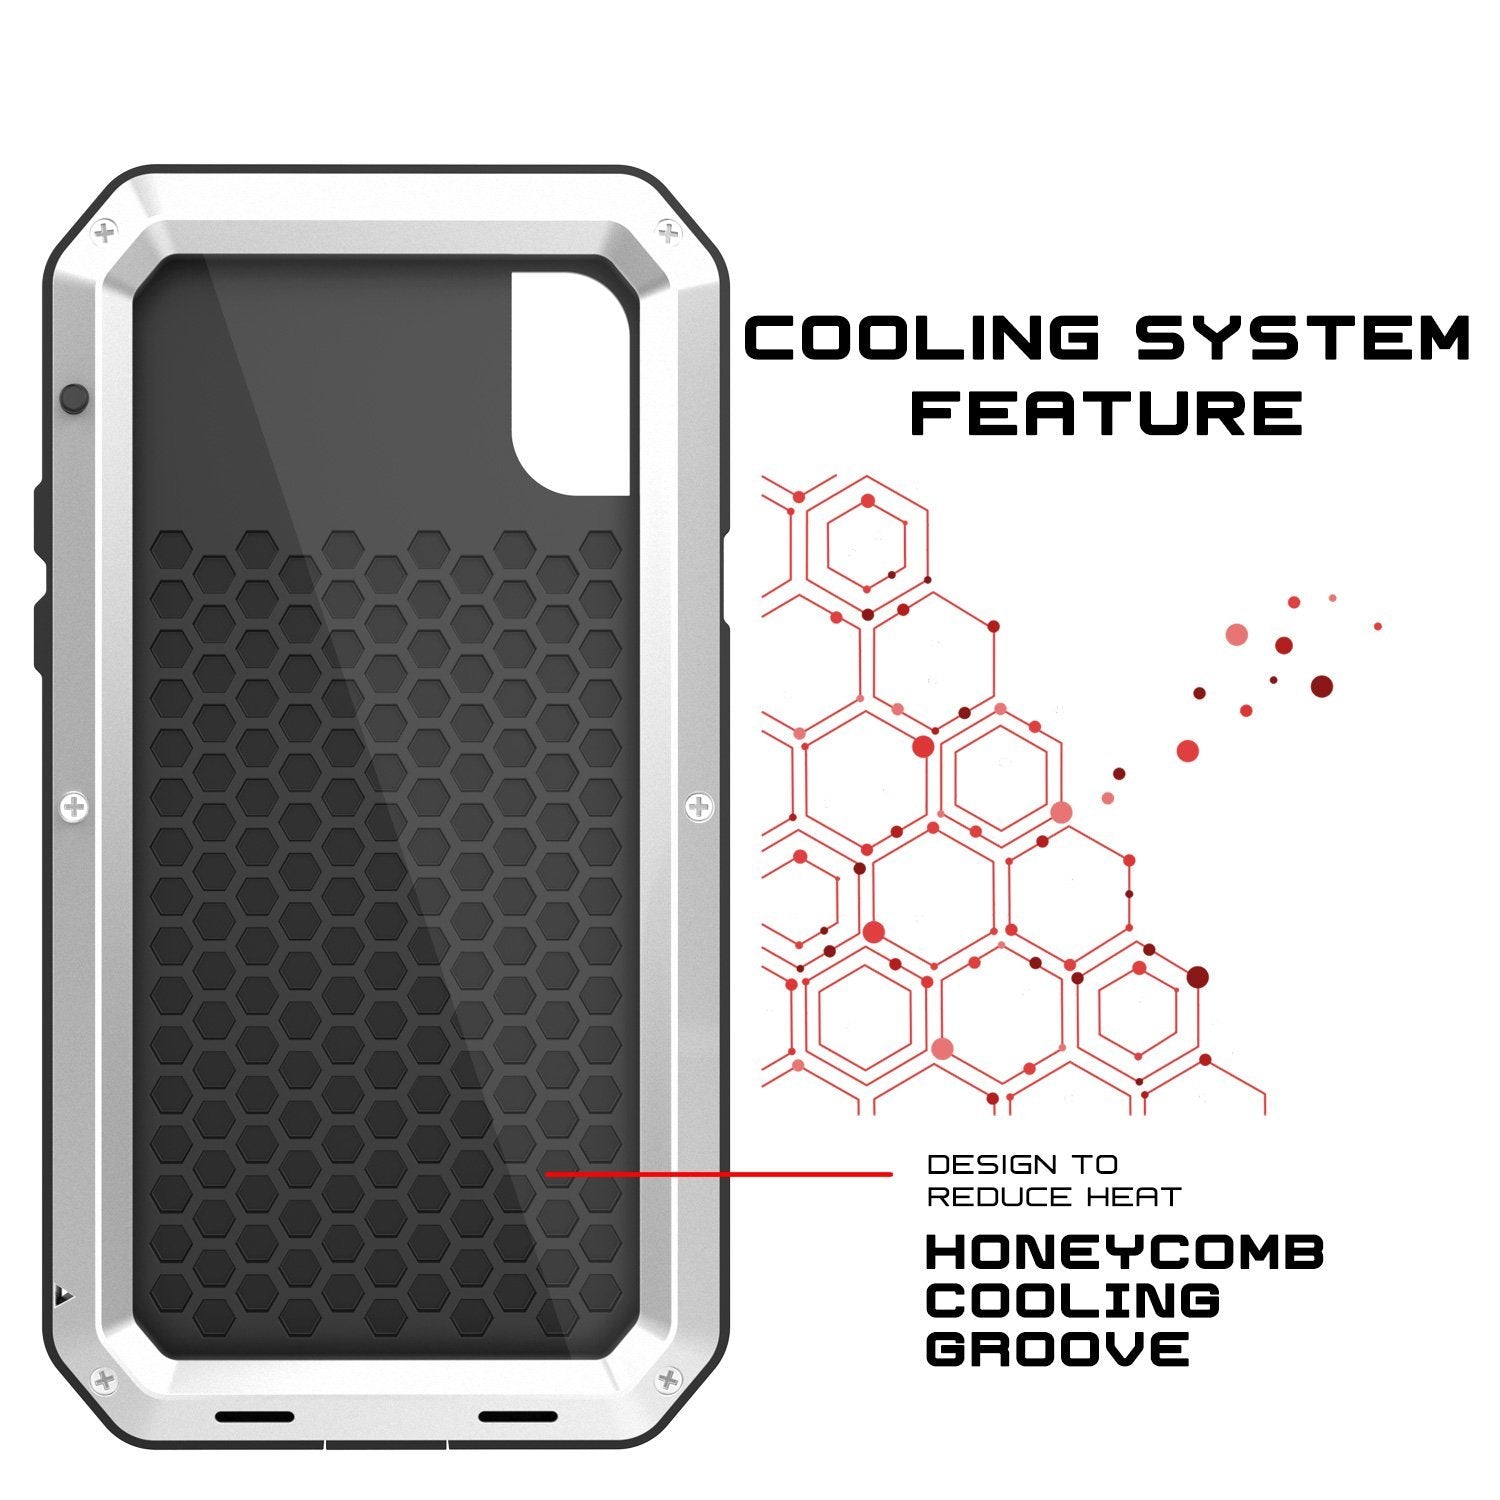 iPhone XR Metal Case, Heavy Duty Military Grade Armor Cover [shock proof] Full Body Hard [White]